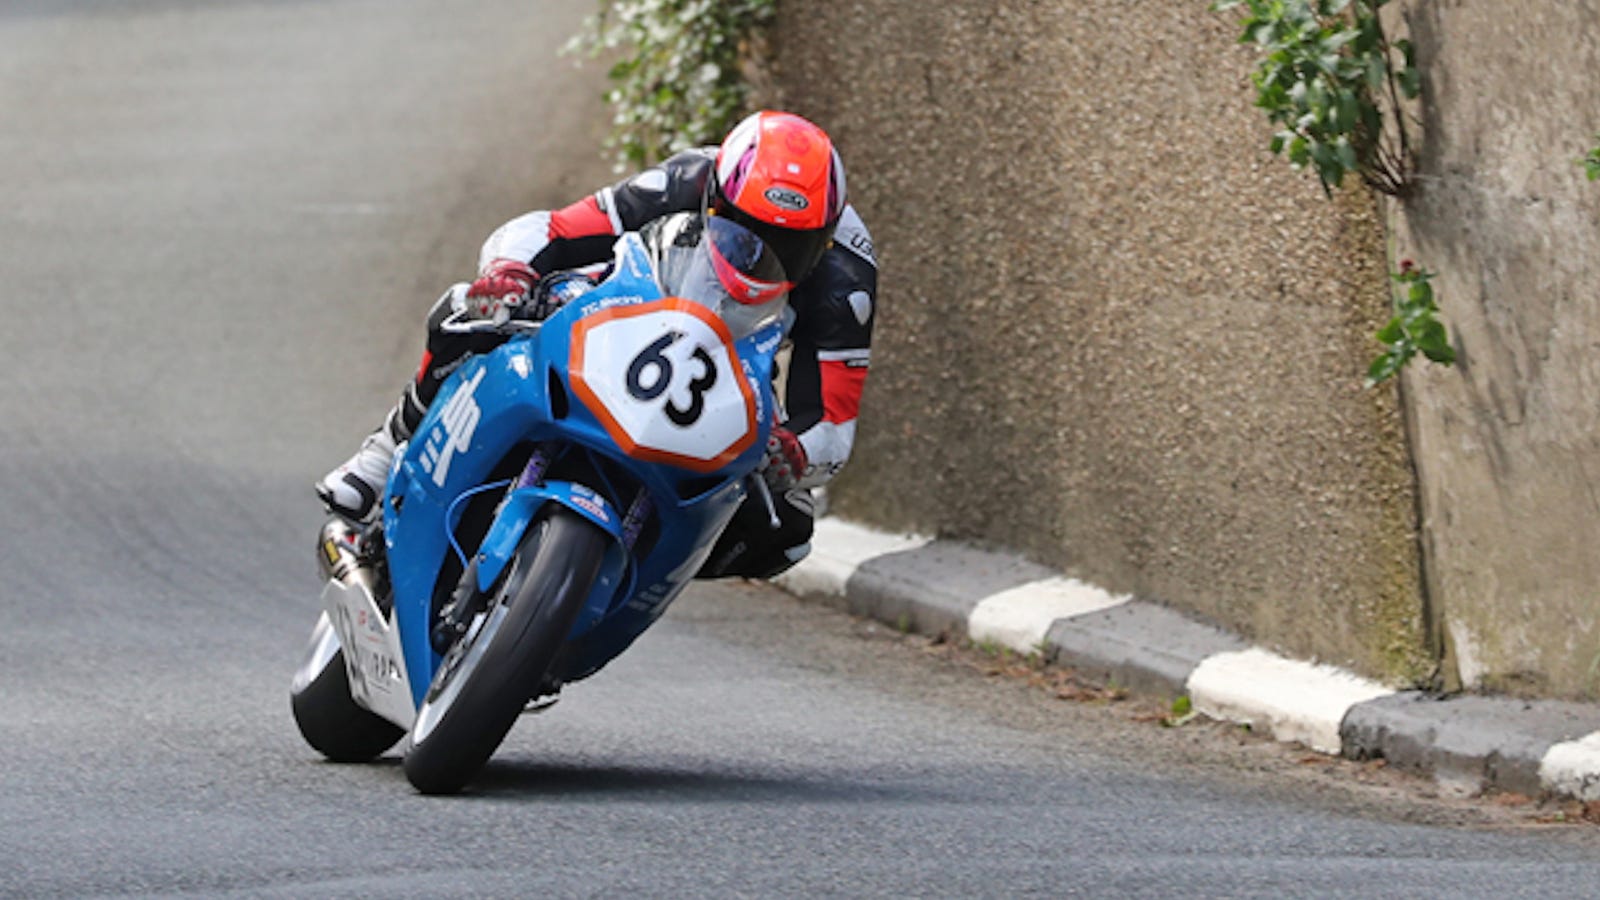 Superstock Competitor Second Isle Of Man TT Death This Year